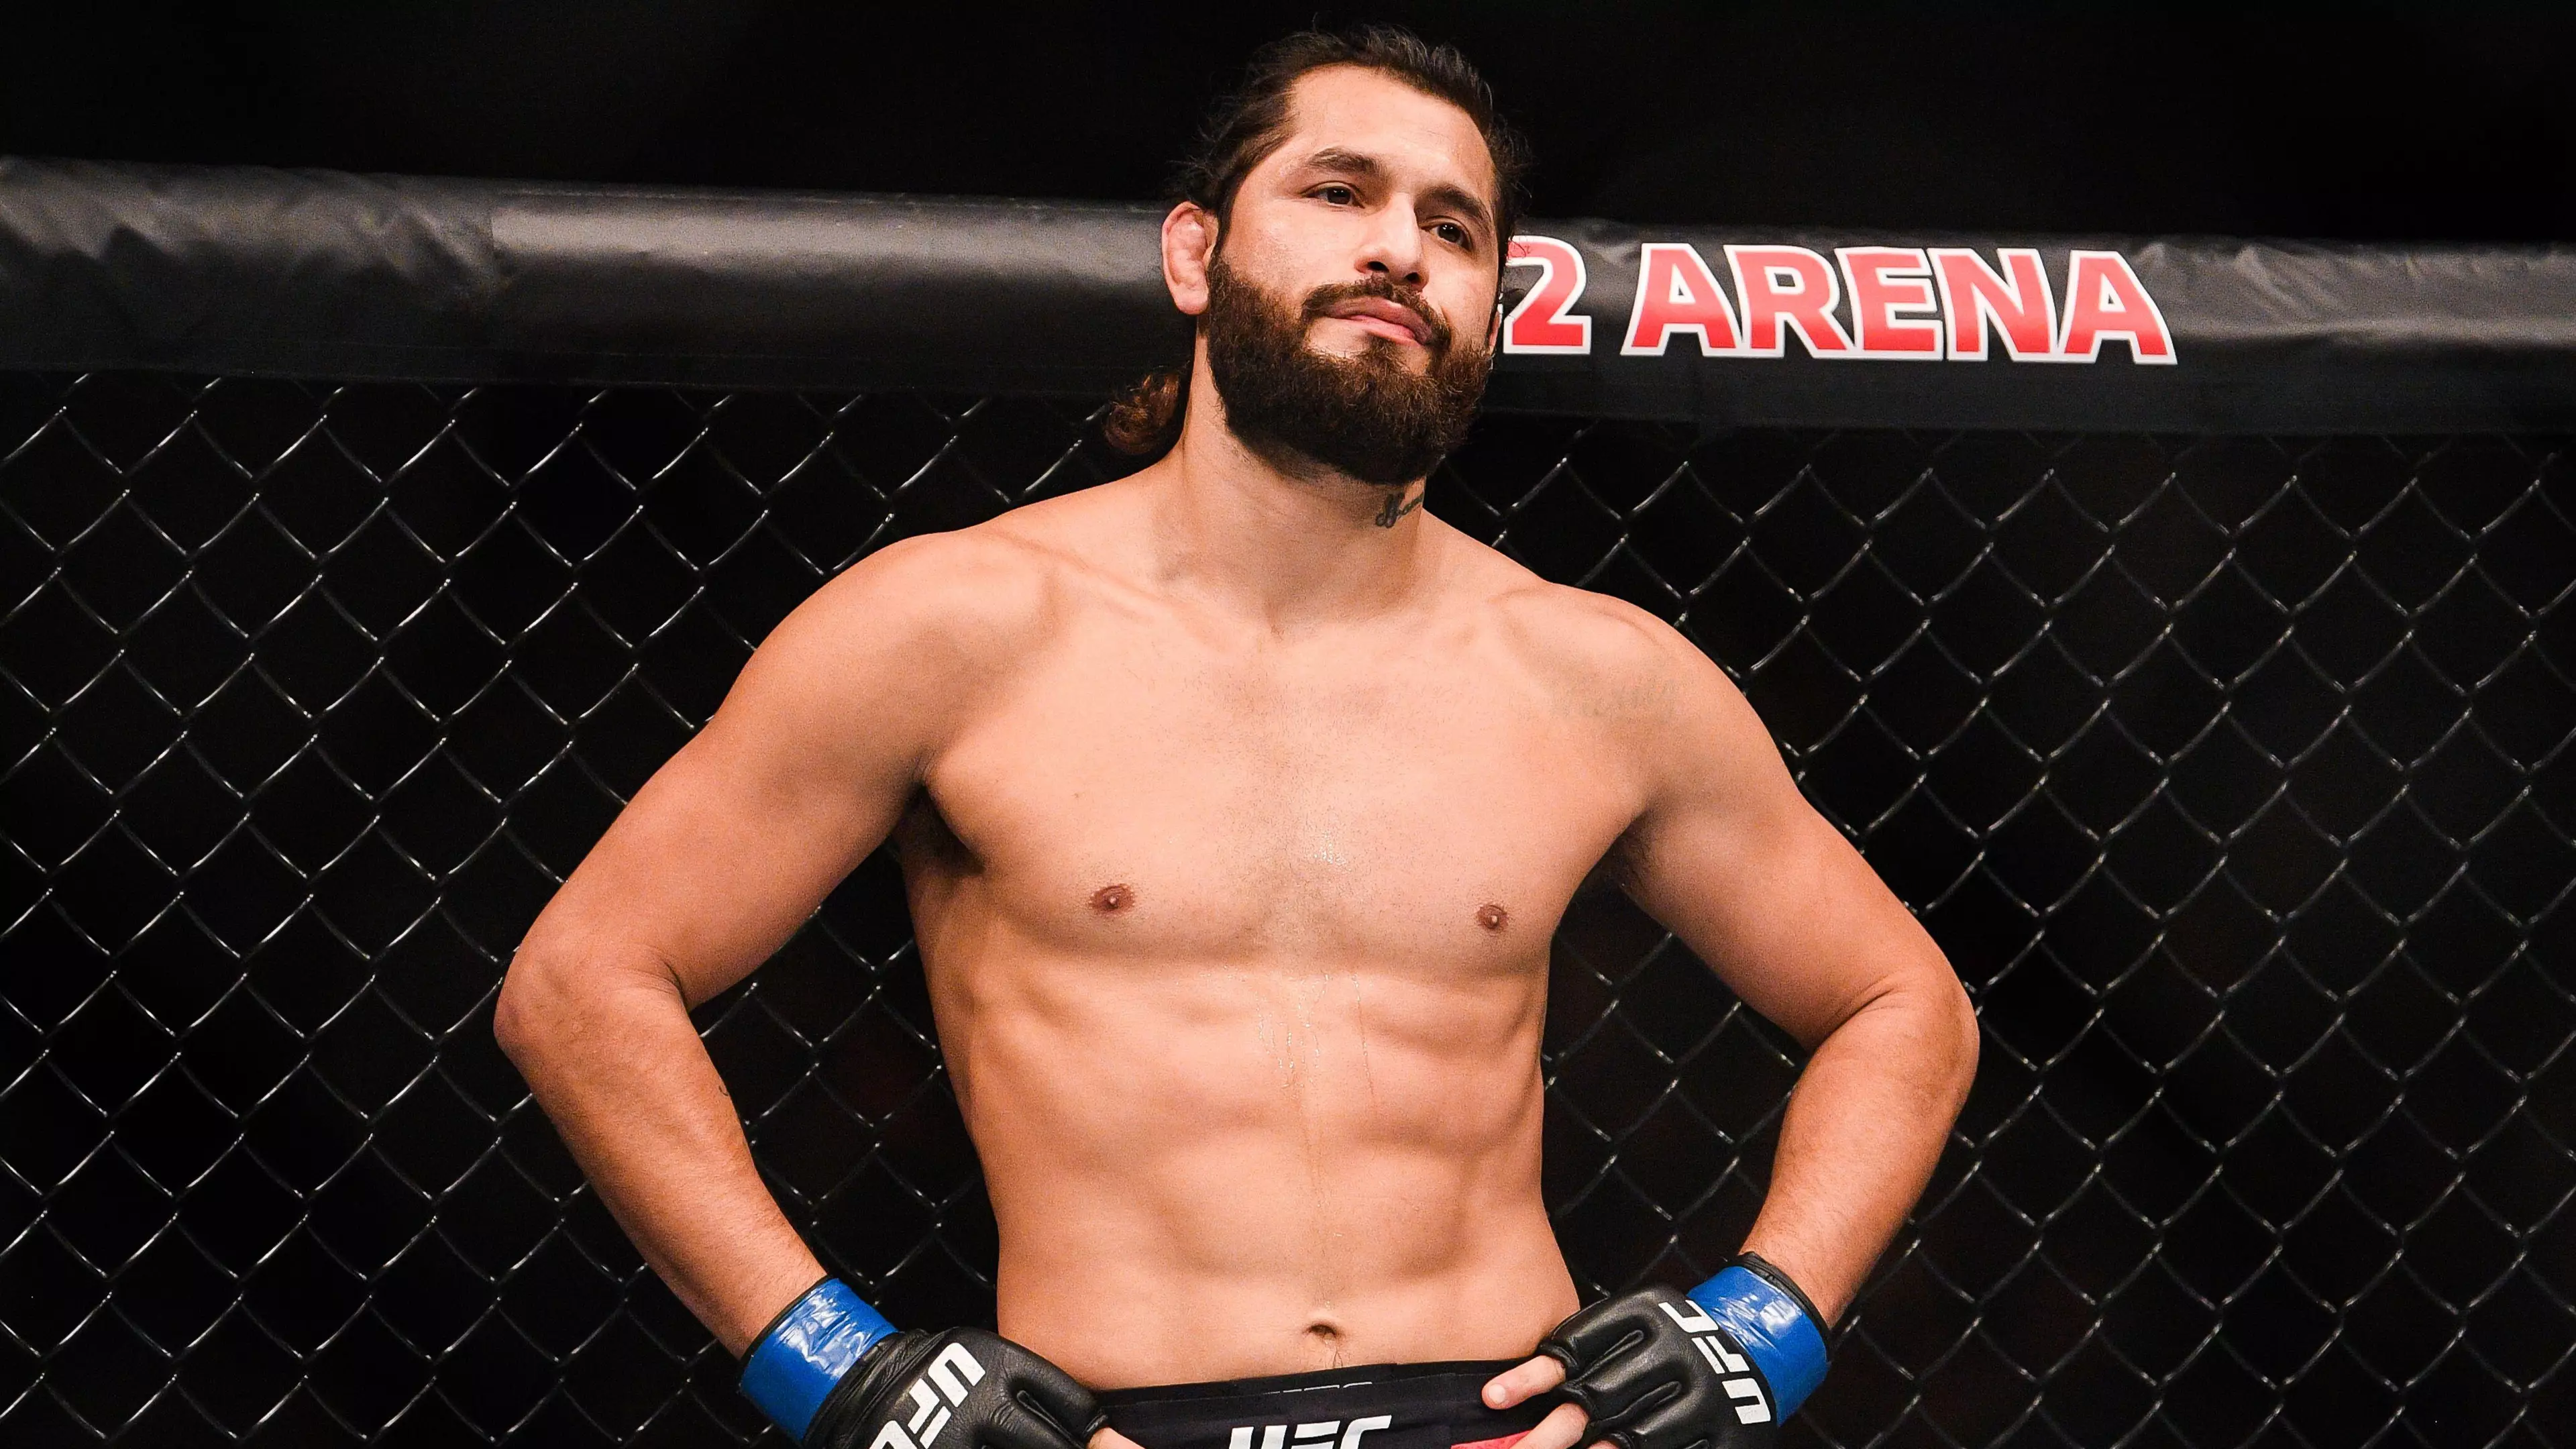 UFC Star Jorge Masvidal Wants $20 Million To Box Jake Paul In An MMA Cage